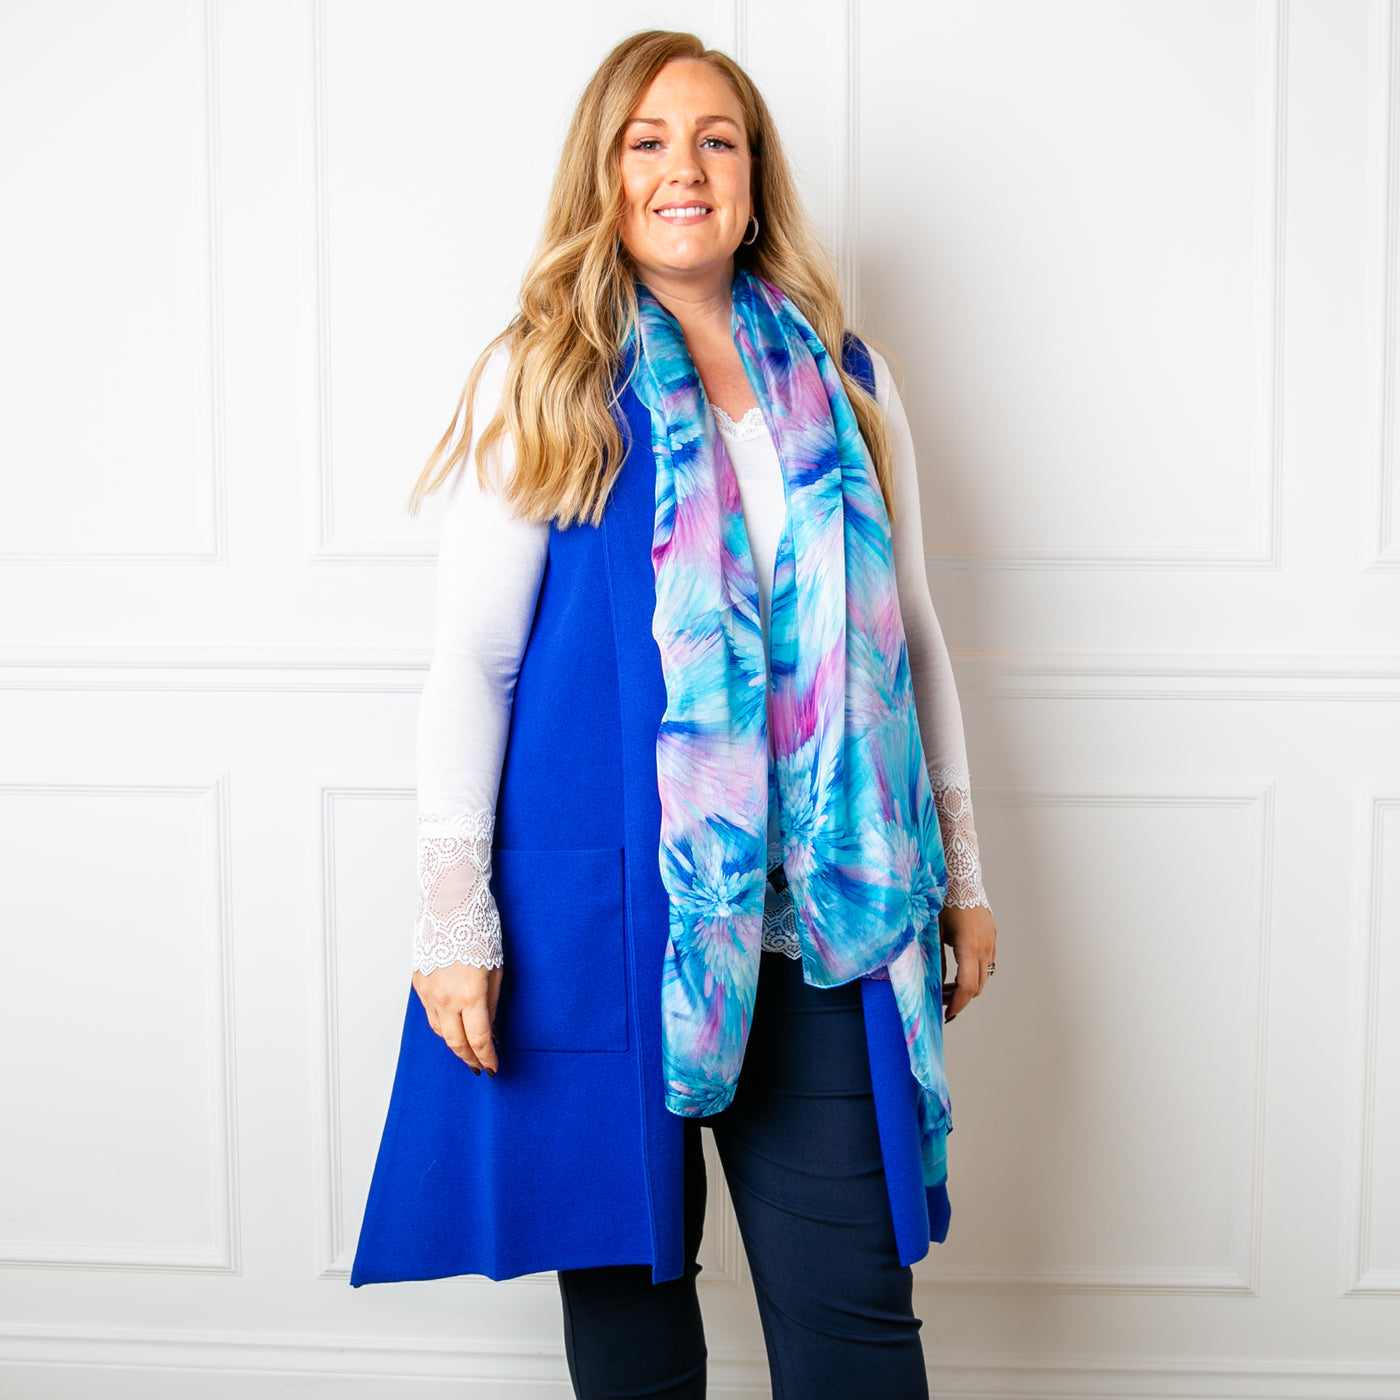 The Sleeveless Cardigan in royal blue with side pockets for added comfort